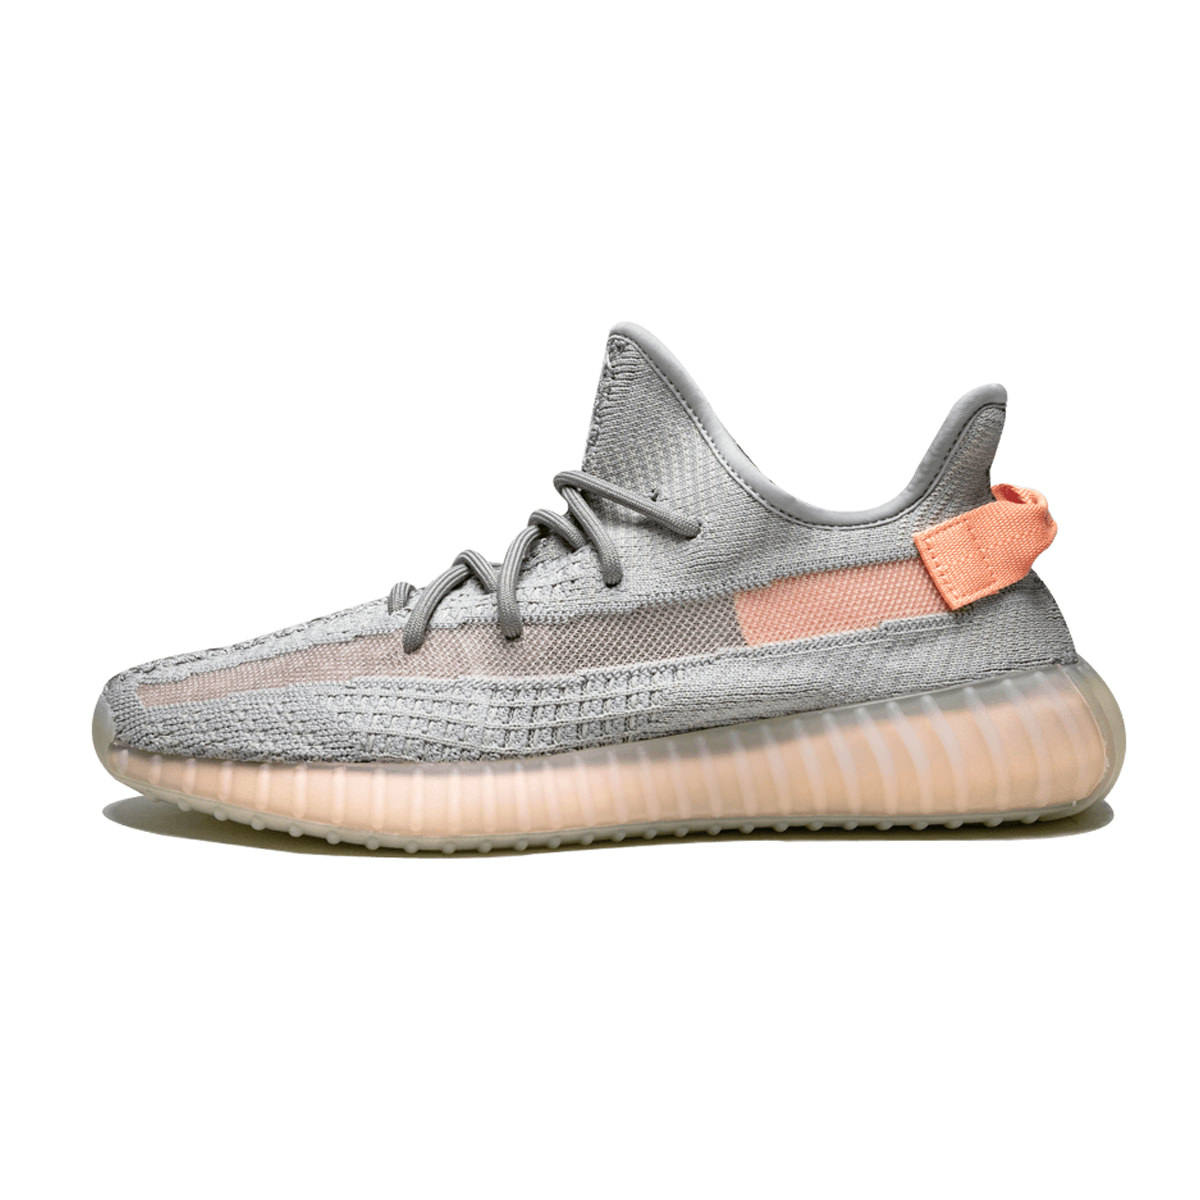 adidas Yeezy Boost 350 V2 Trfrm - OFour